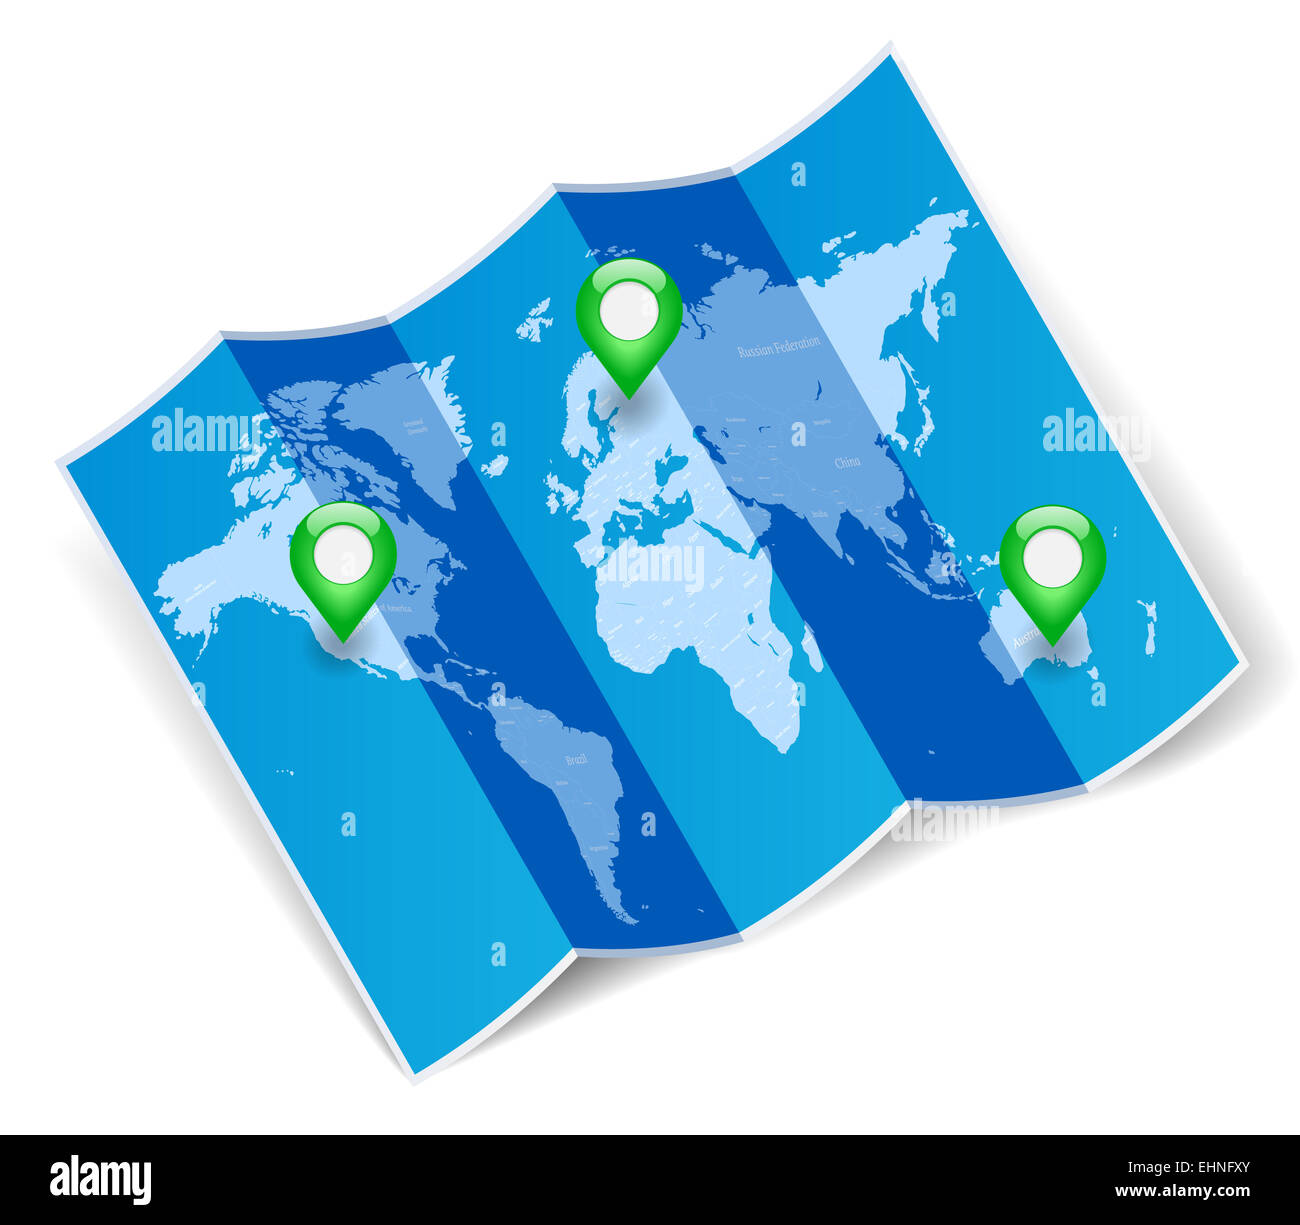 World map with gps marks Stock Photo